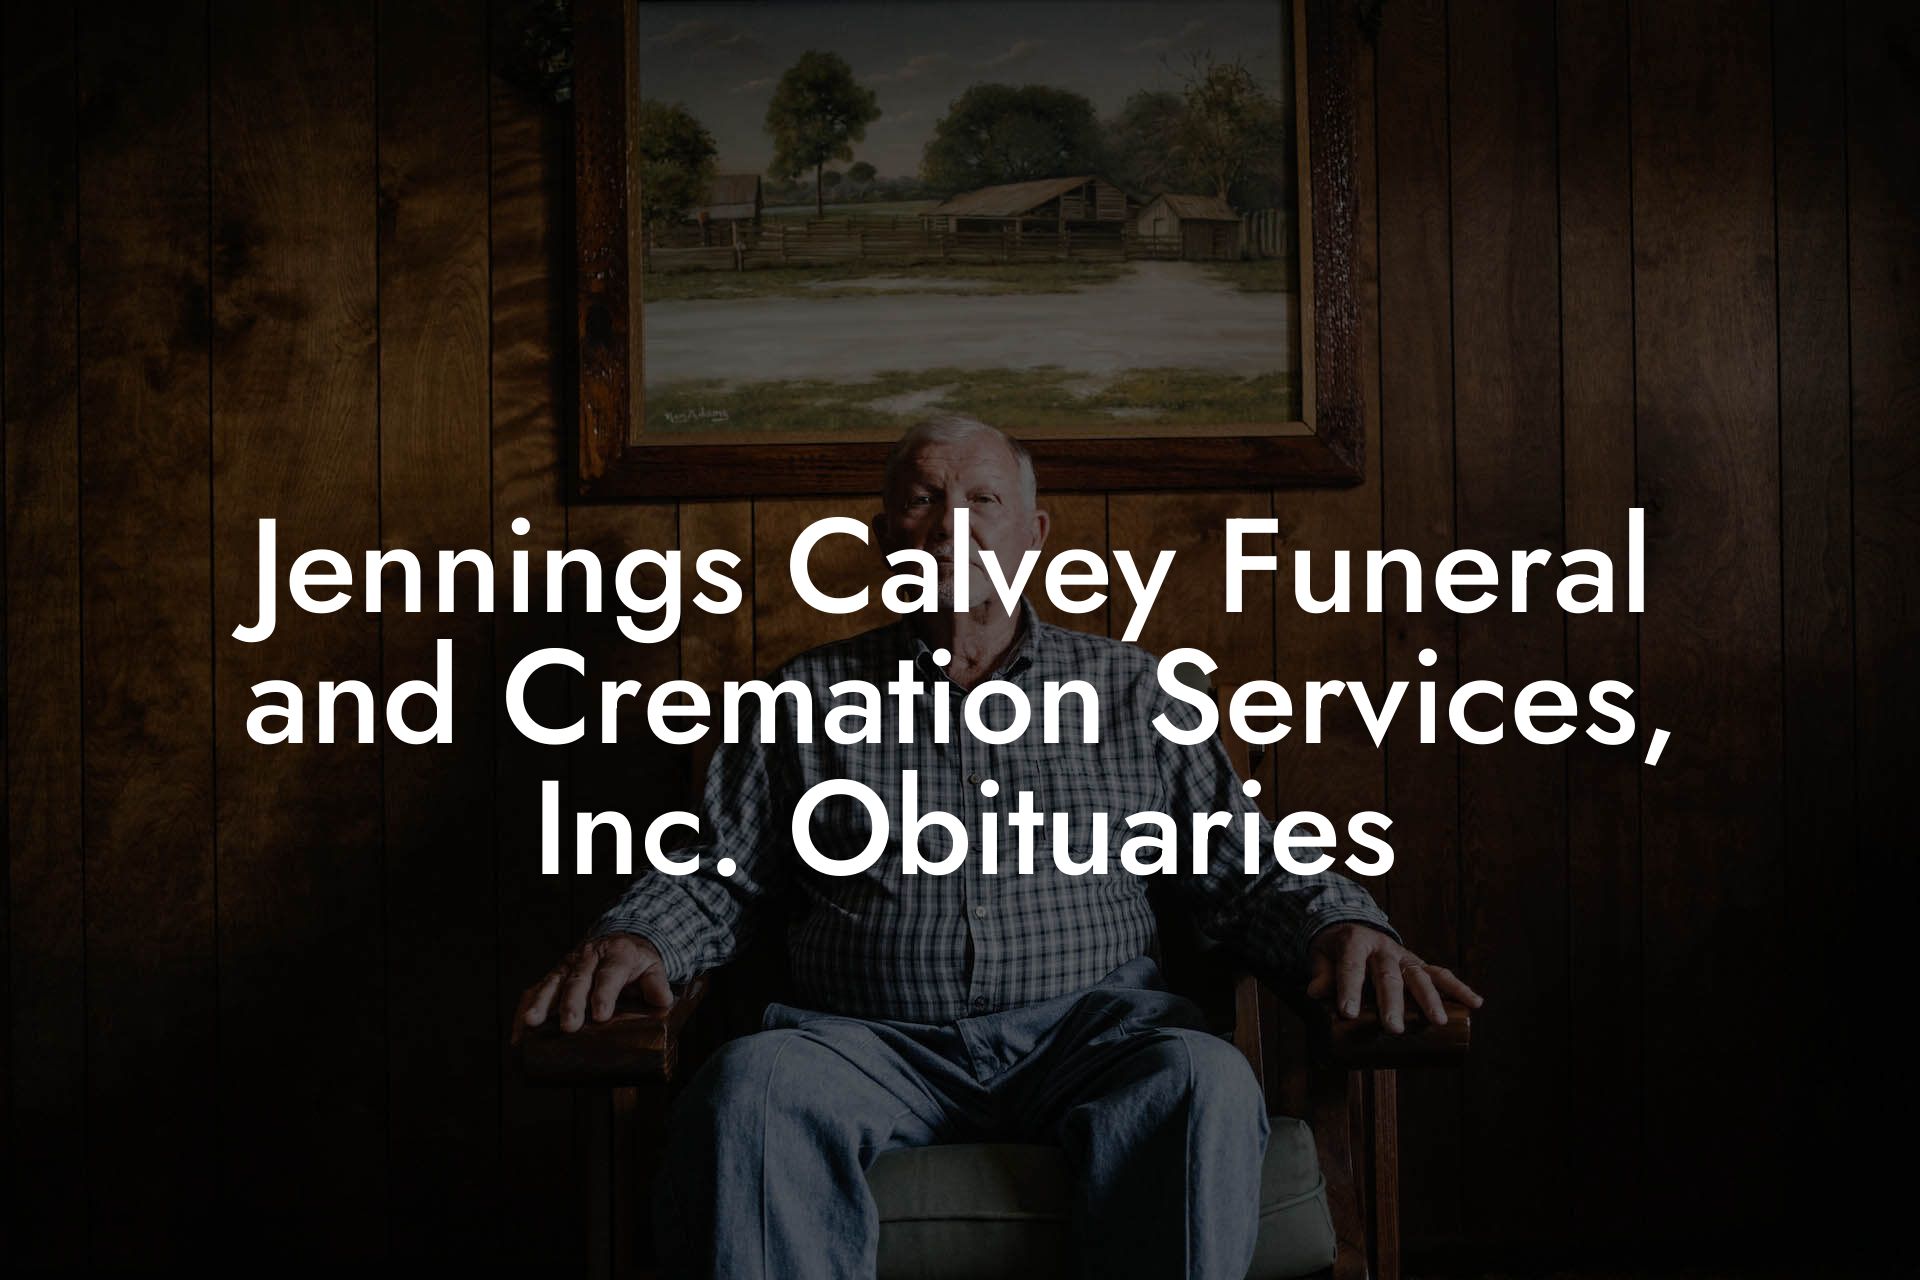 Jennings Calvey Funeral and Cremation Services, Inc. Obituaries